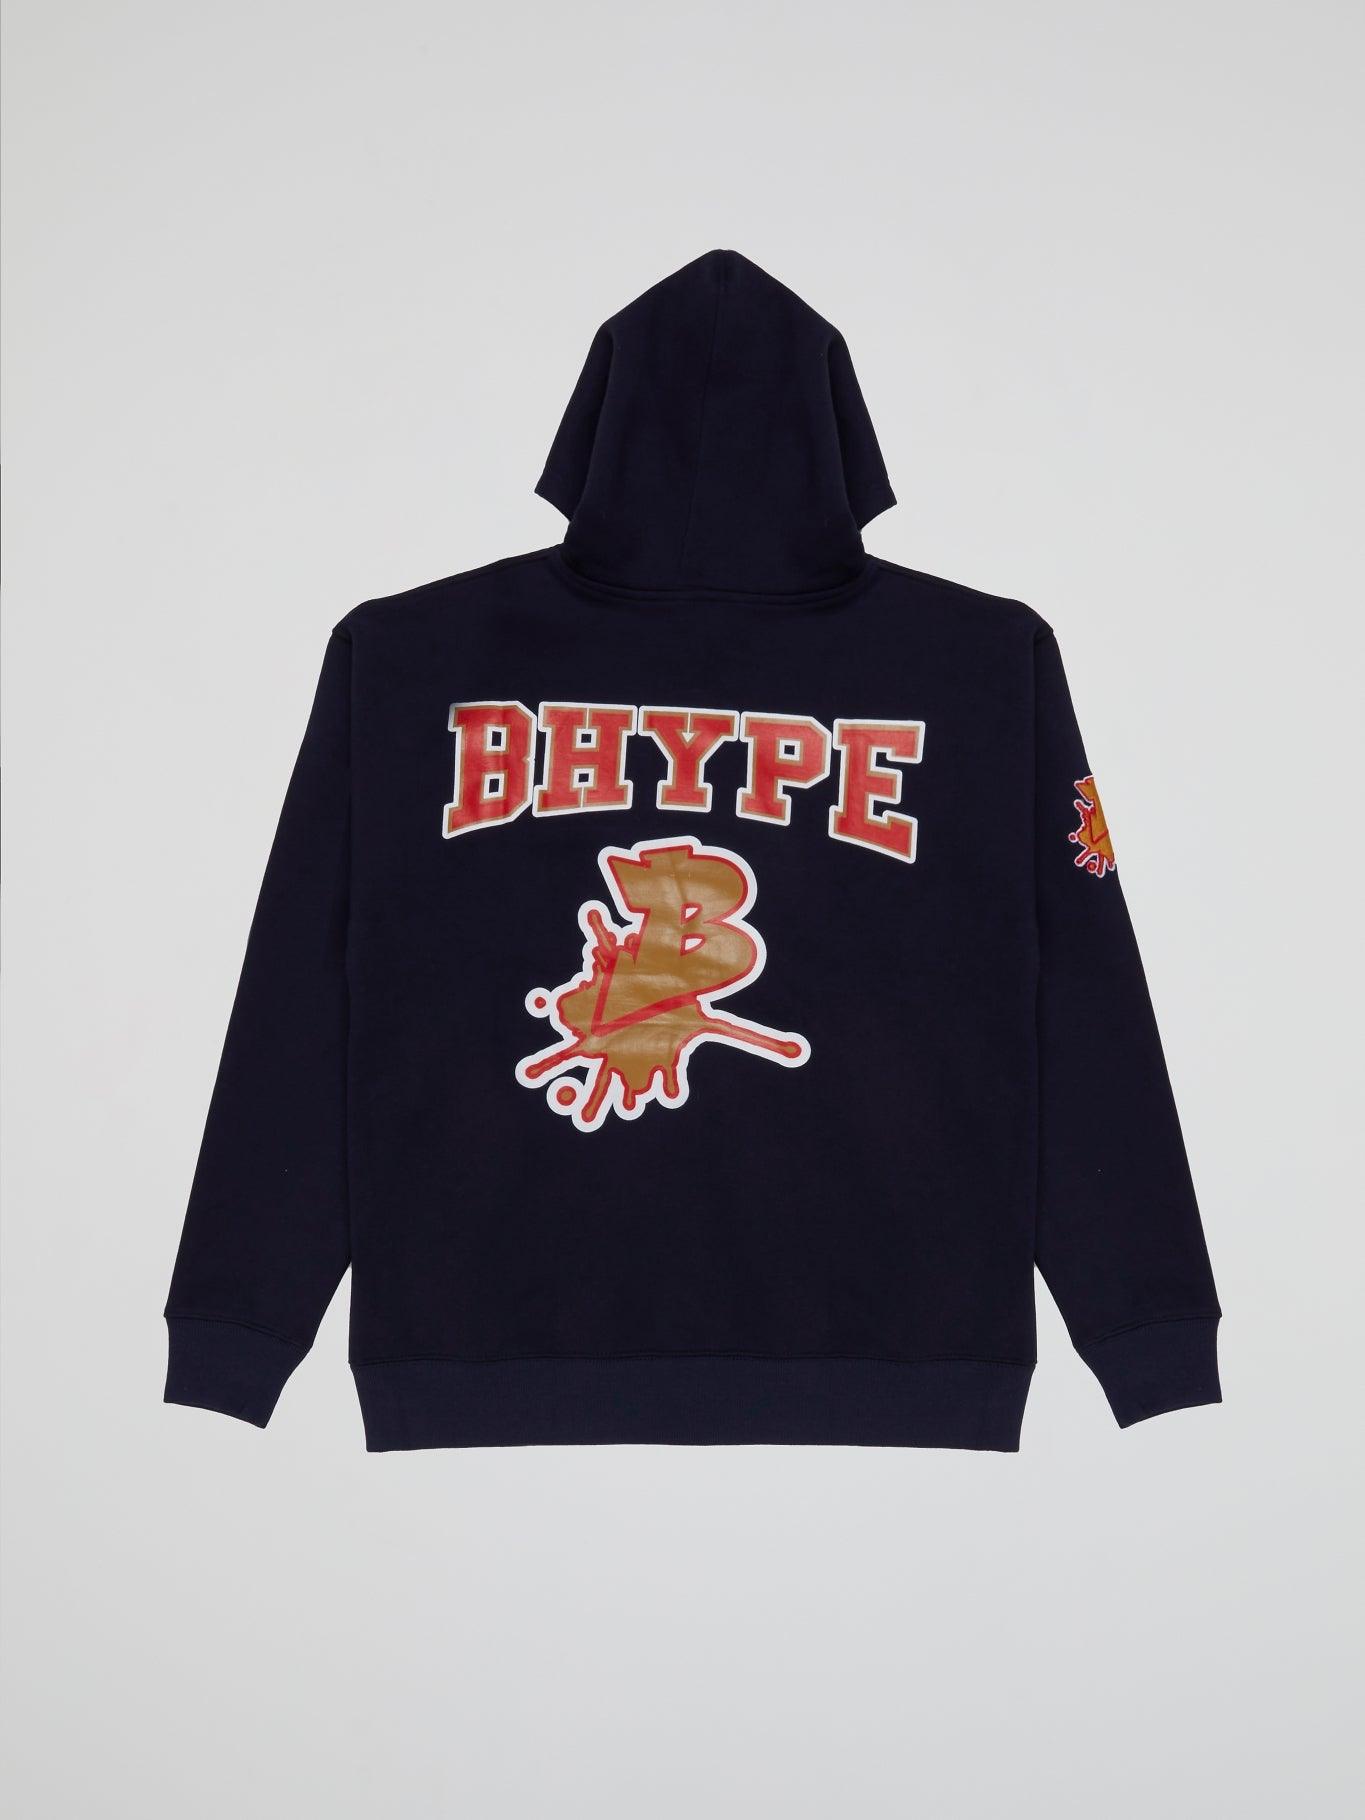 BHYPE MARINE BLUE HOODIE VARSITY COLLECTION - B-Hype Society